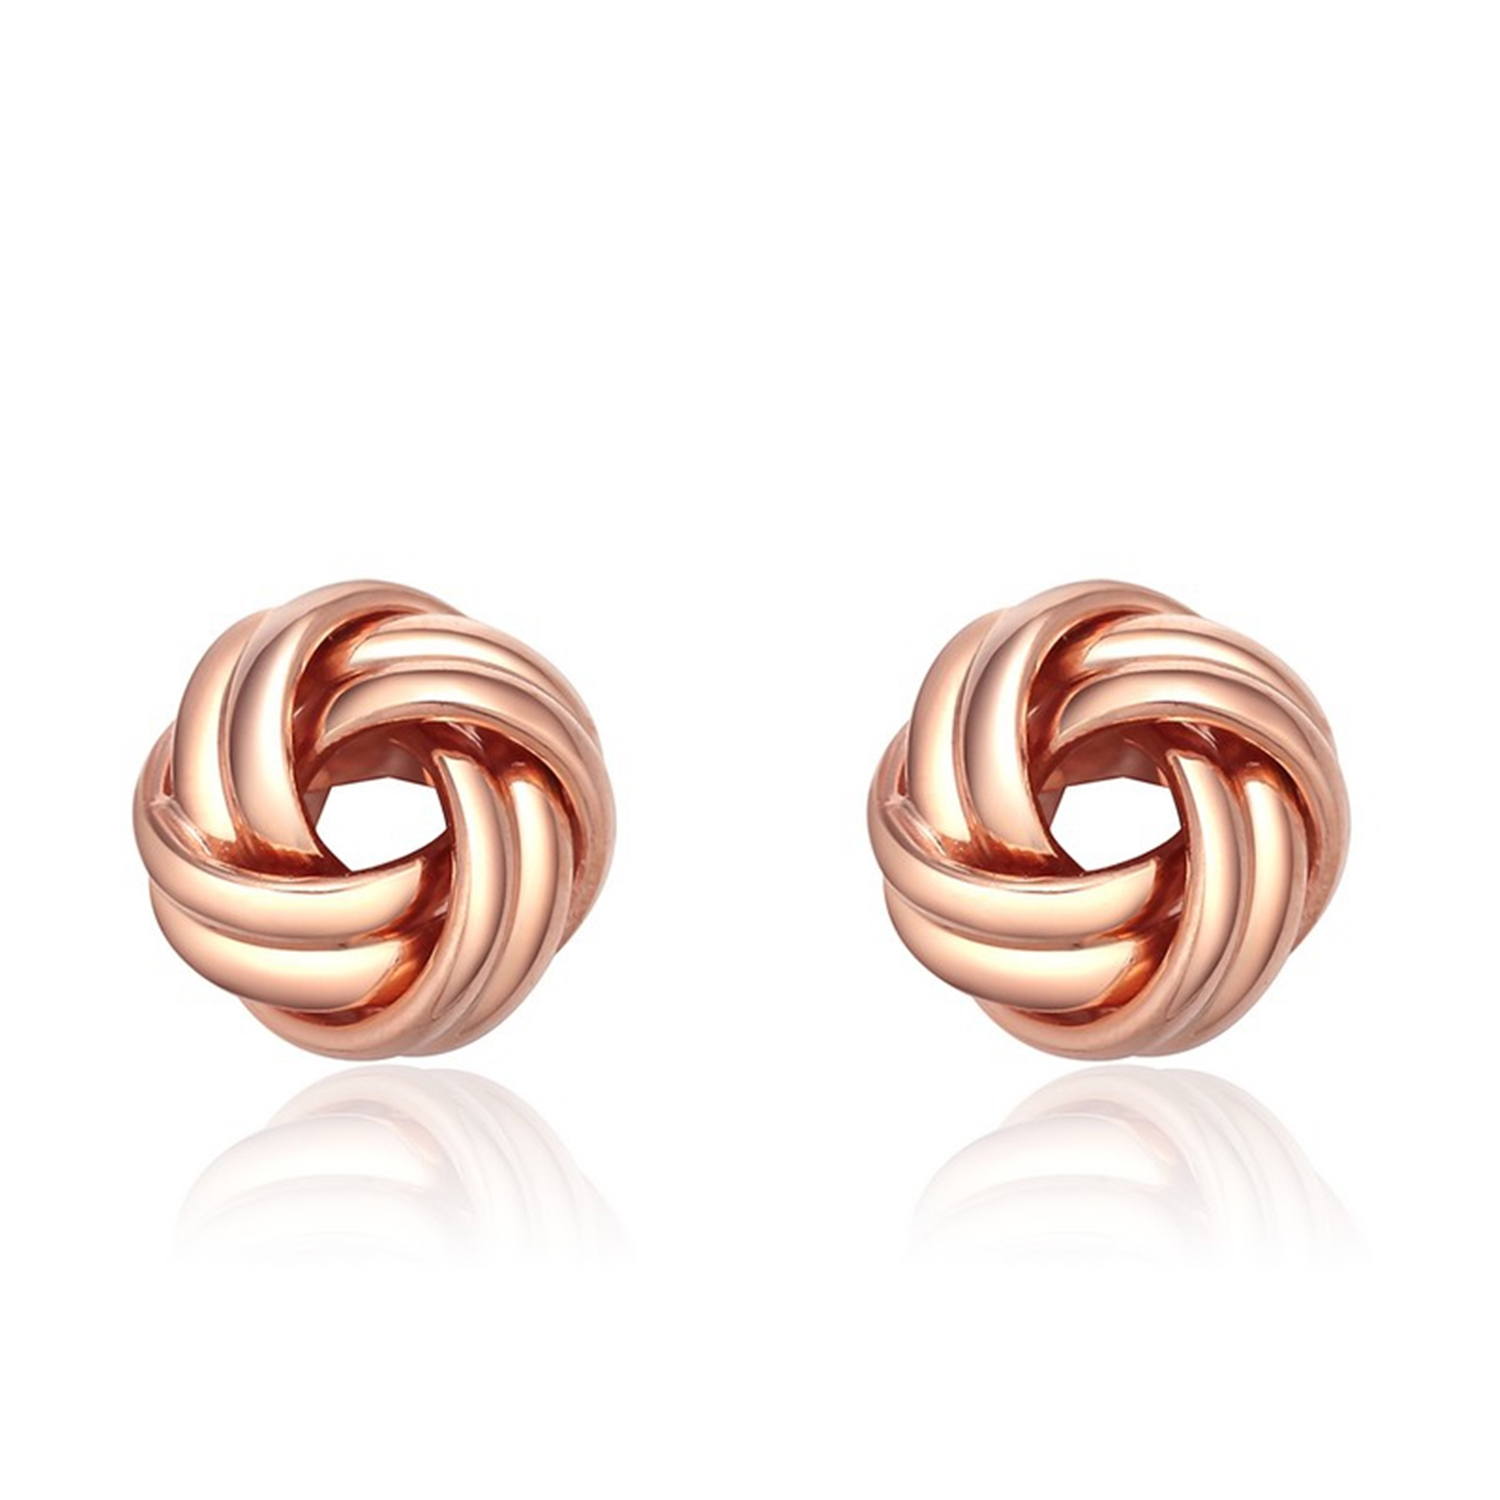 Best Selling Minimalism Earring 925 Sterling Silver Rose Gold Plated Women Gift Earring Stud Jewelry(图3)